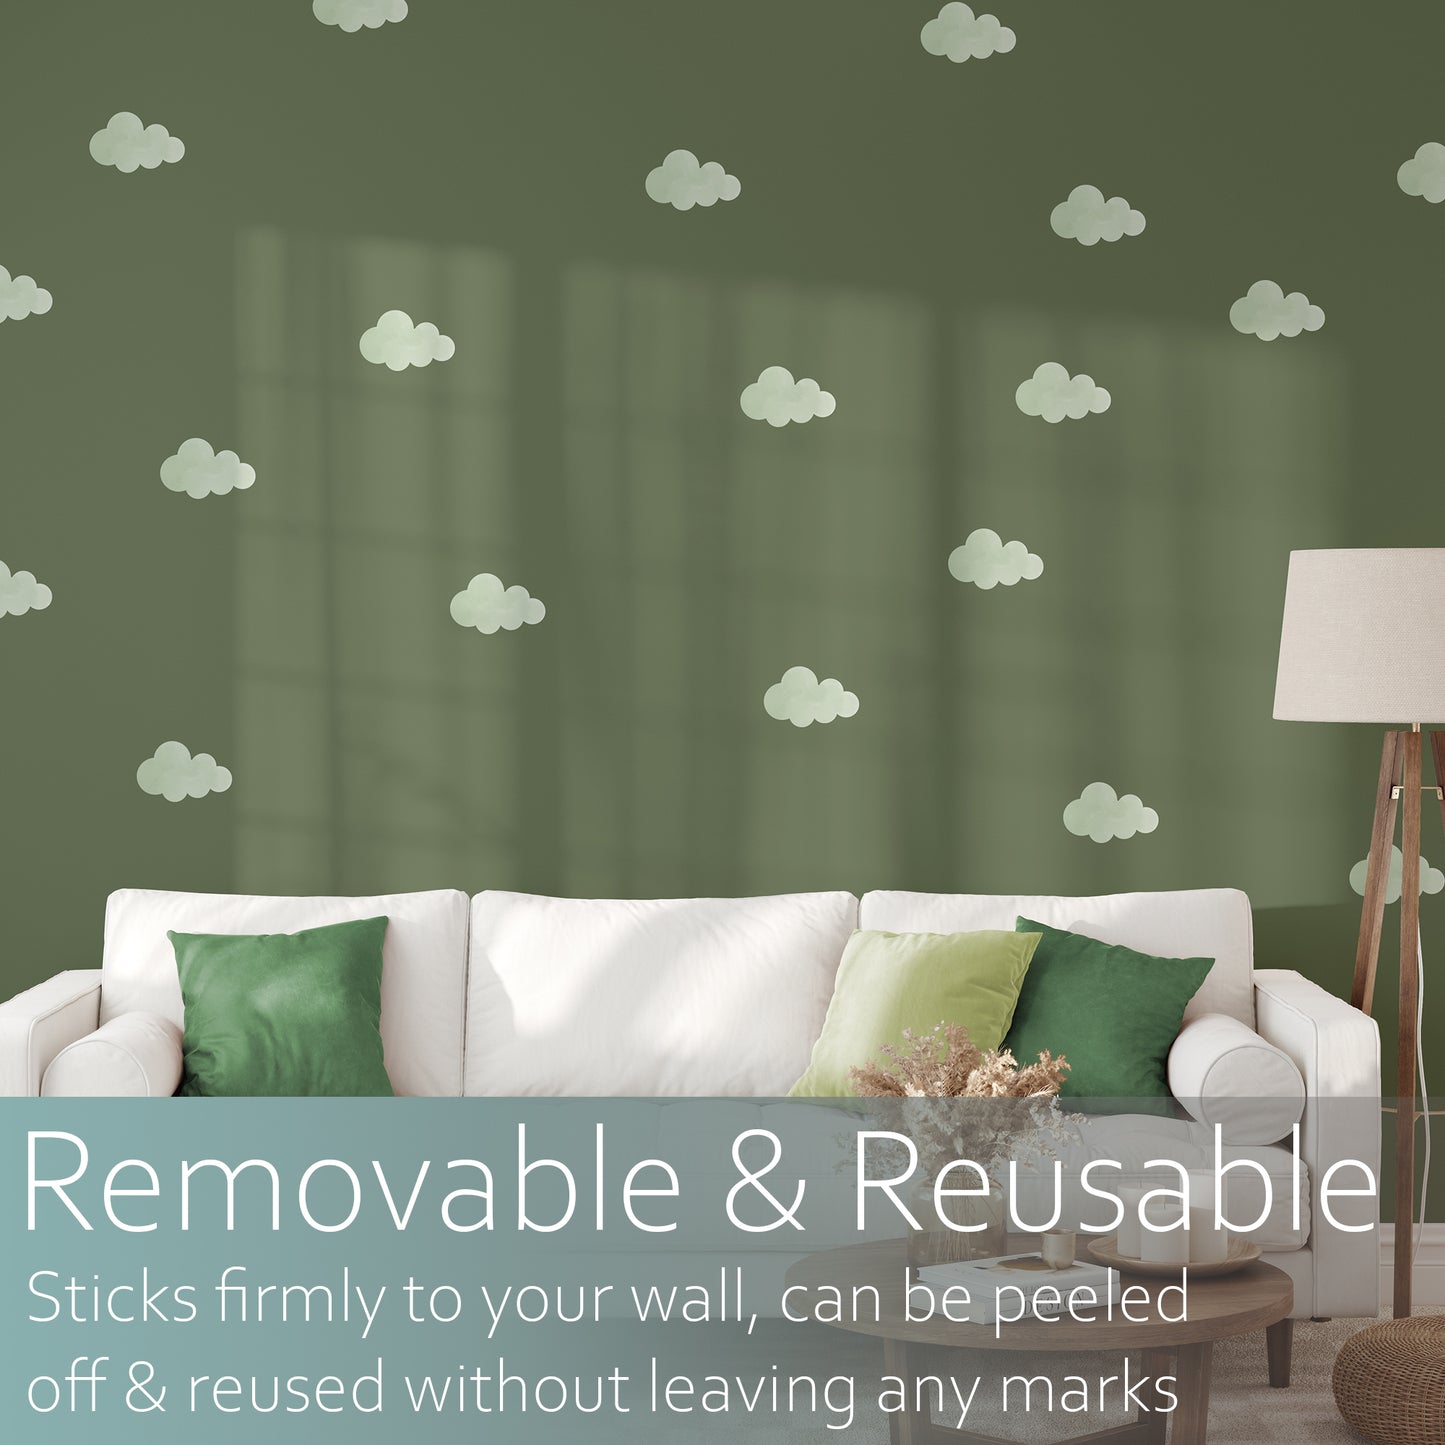 Green clouds | Fabric wall stickers